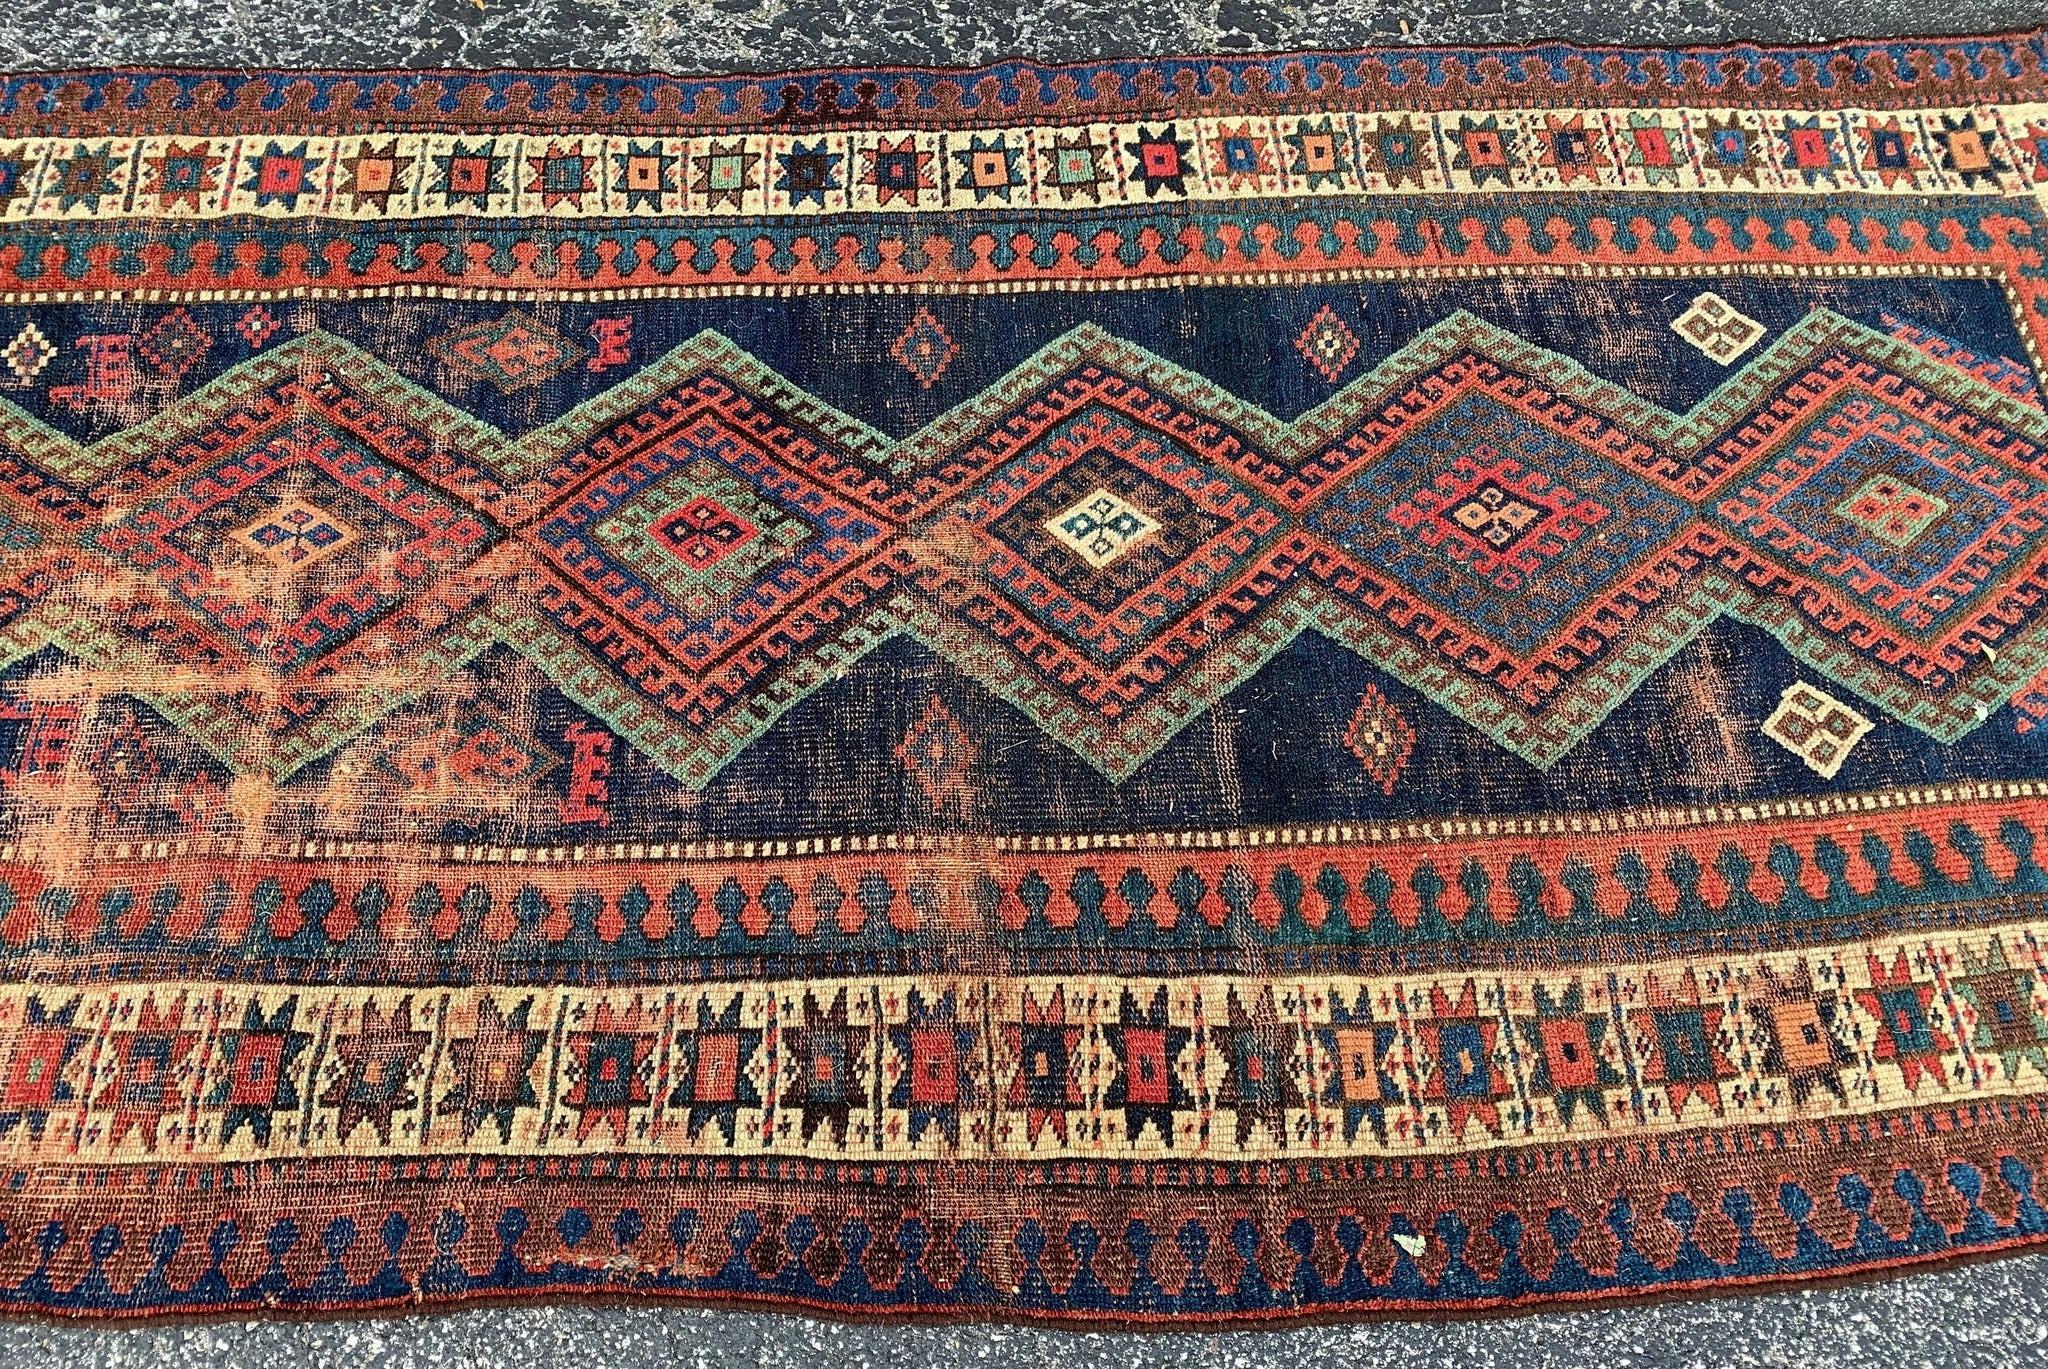 Jommi Mesmerizing Geometric Antique Tribal Rug Wide Runner

About this rug: Such an incredible rug, one of my top 5 rugs we have for sure! Deep indigo blue that allows the minty greens, chocolate browns, and blushy rusts to pop! Super casual and